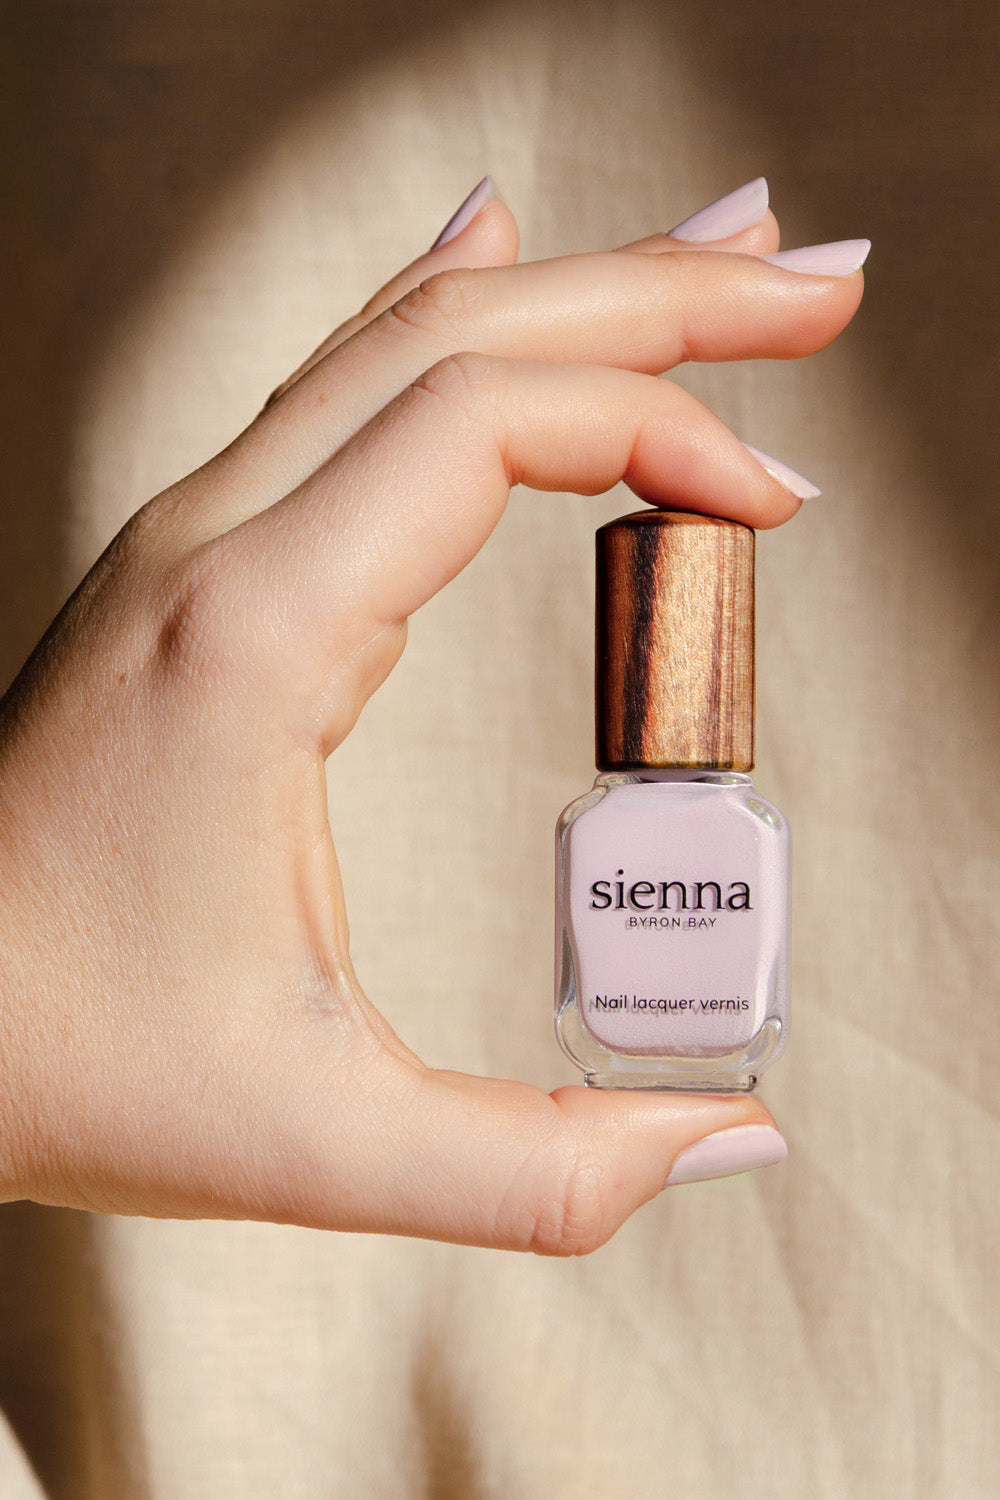 Tranquility Light Mauve Rose Crème nail polish by Sienna Byron Bay on fair skin tone hands holding bottle with timber lid.